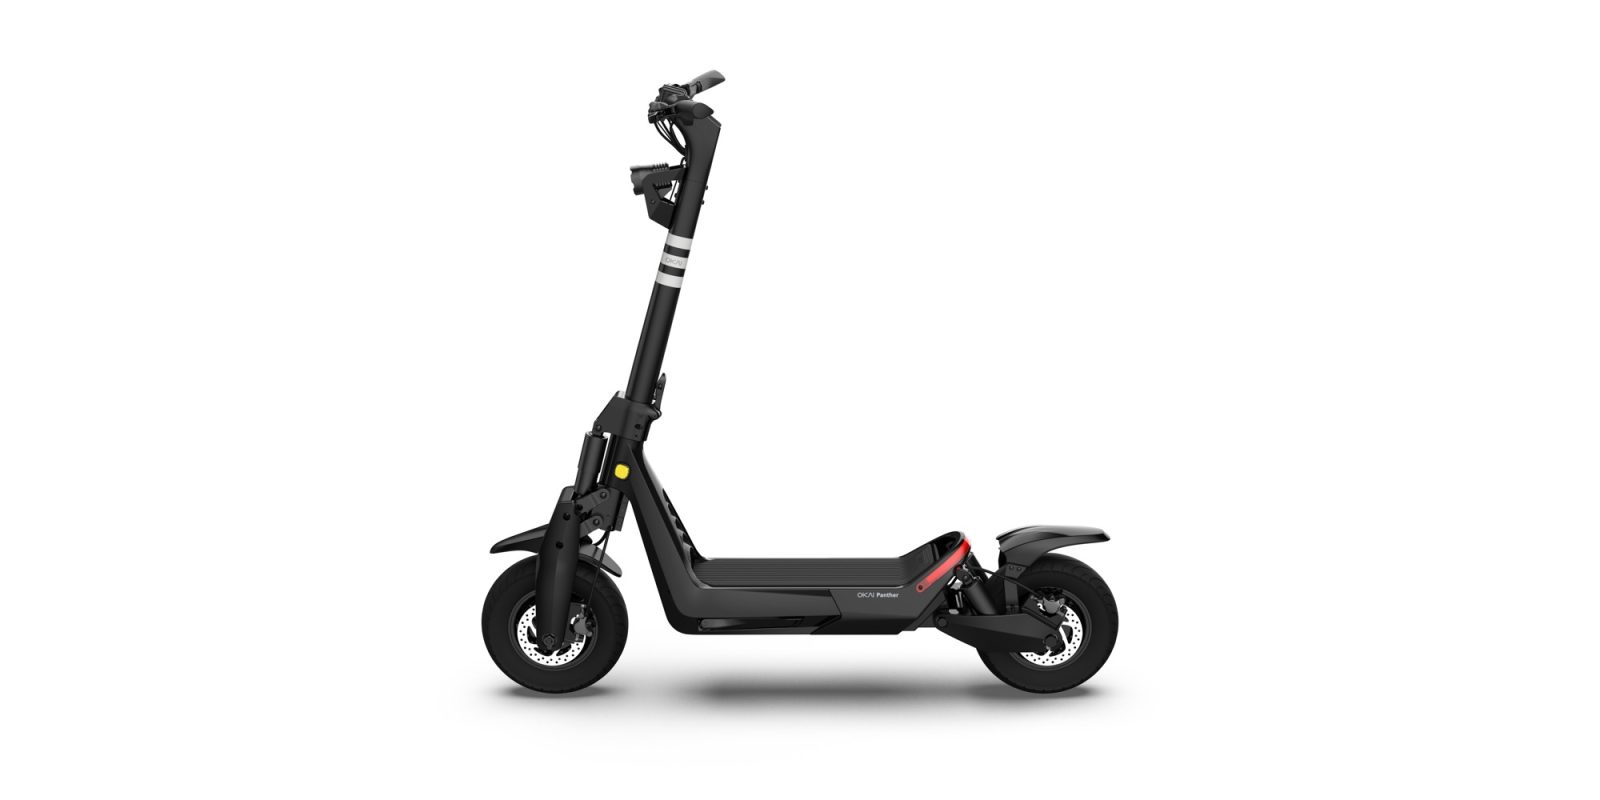 OKAI launches new 37 MPH off-road electric scooter with full suspension